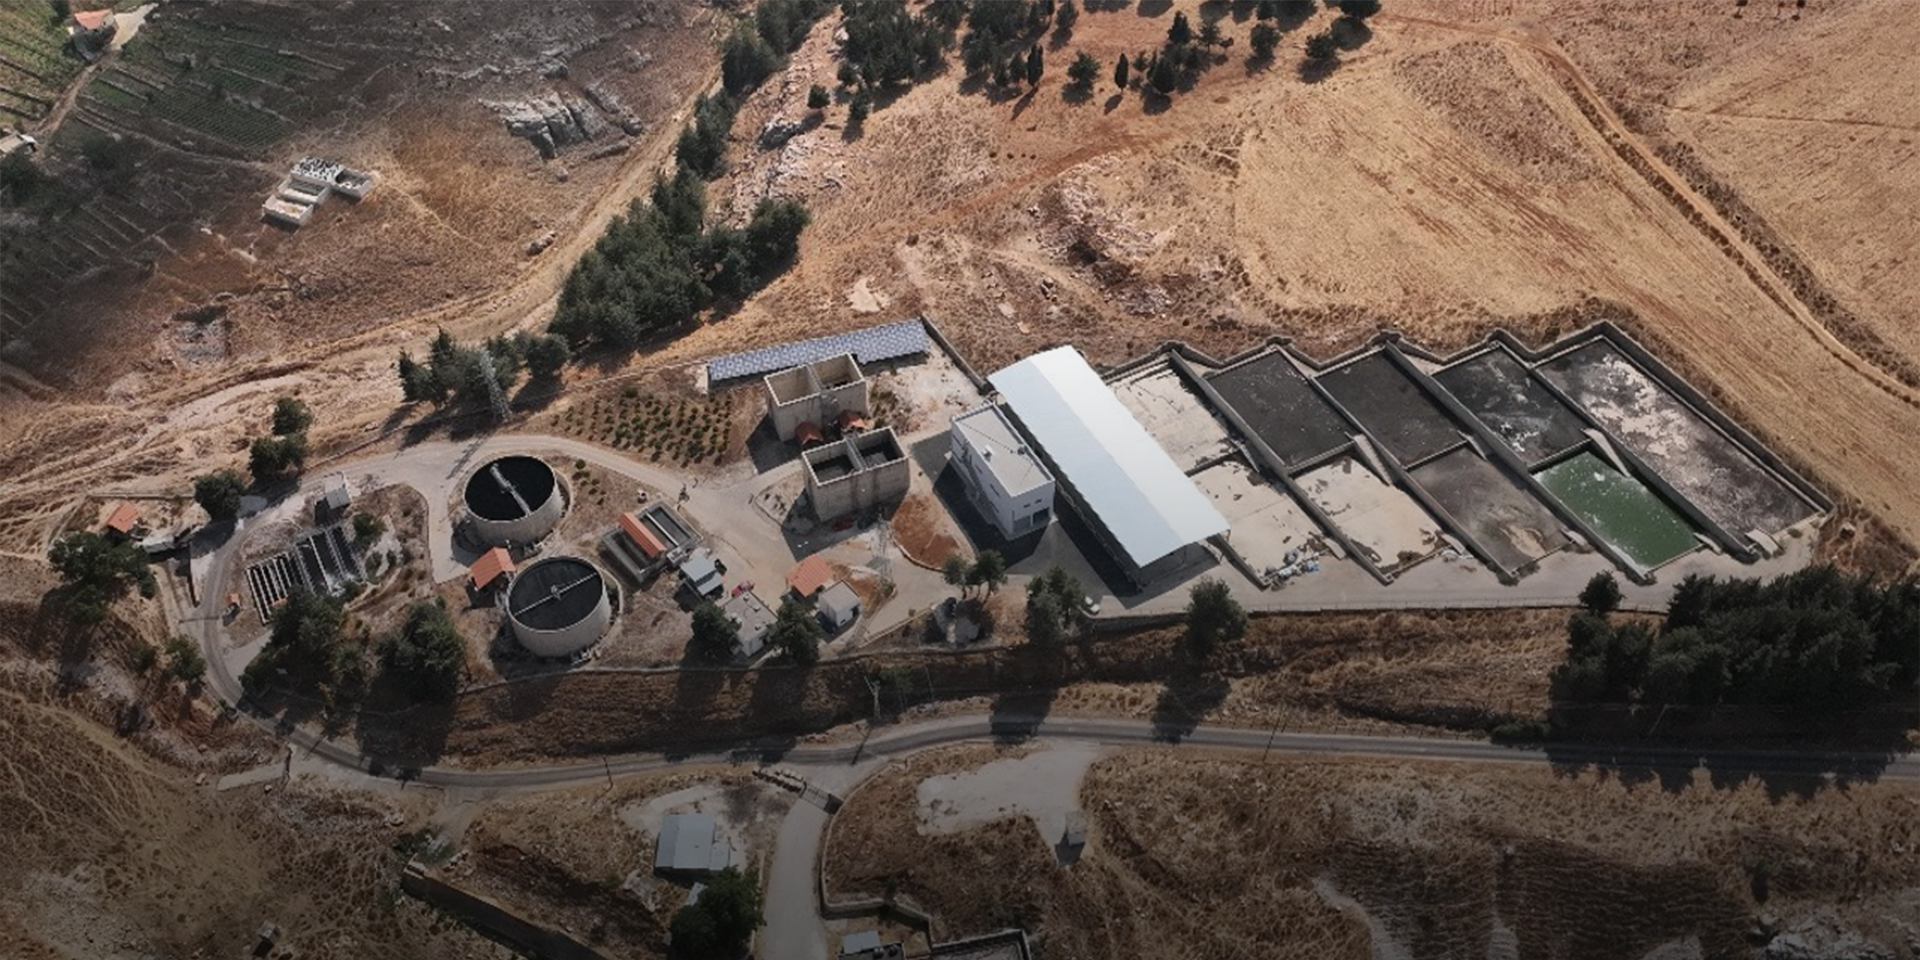 Aerial view of a wastewater treatment plant